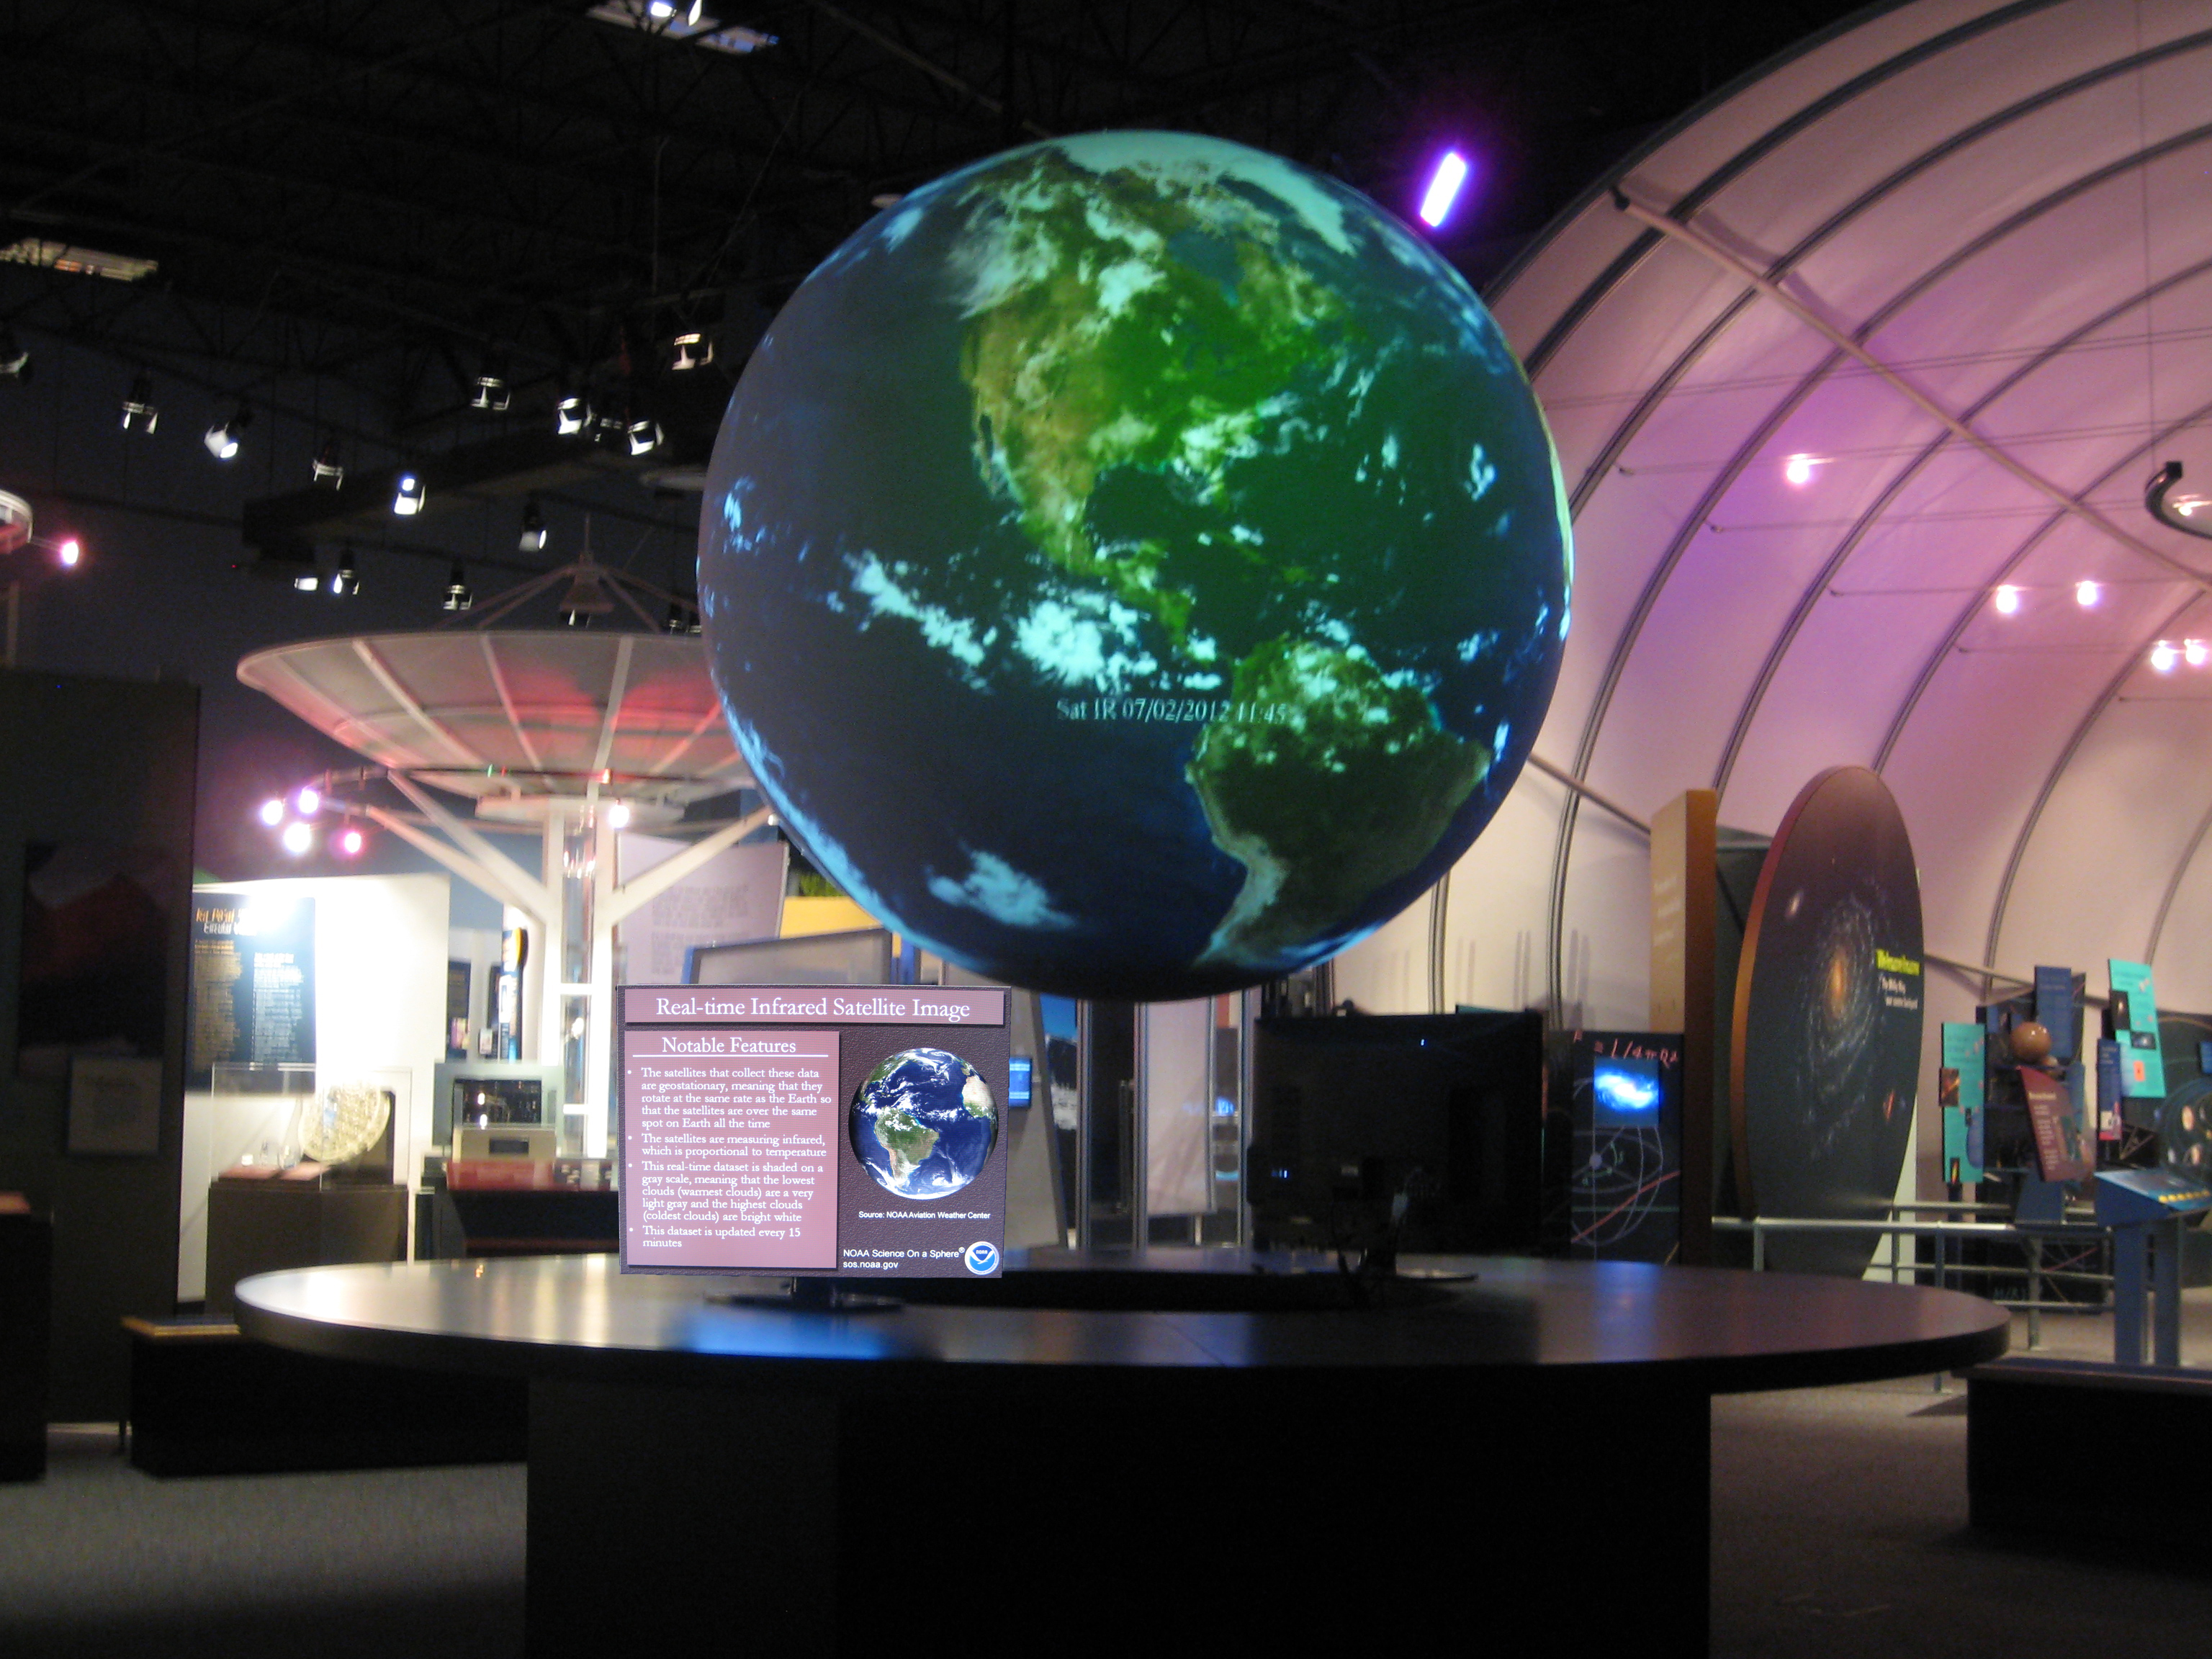 Science On a Sphere hangs in an empty exhibit space over a round table. Two monitors are attached to the table displaying information about the dataset (Real-time Infrared Satellite Image) currently displayed on the Sphere. More exhibits are visible in the background